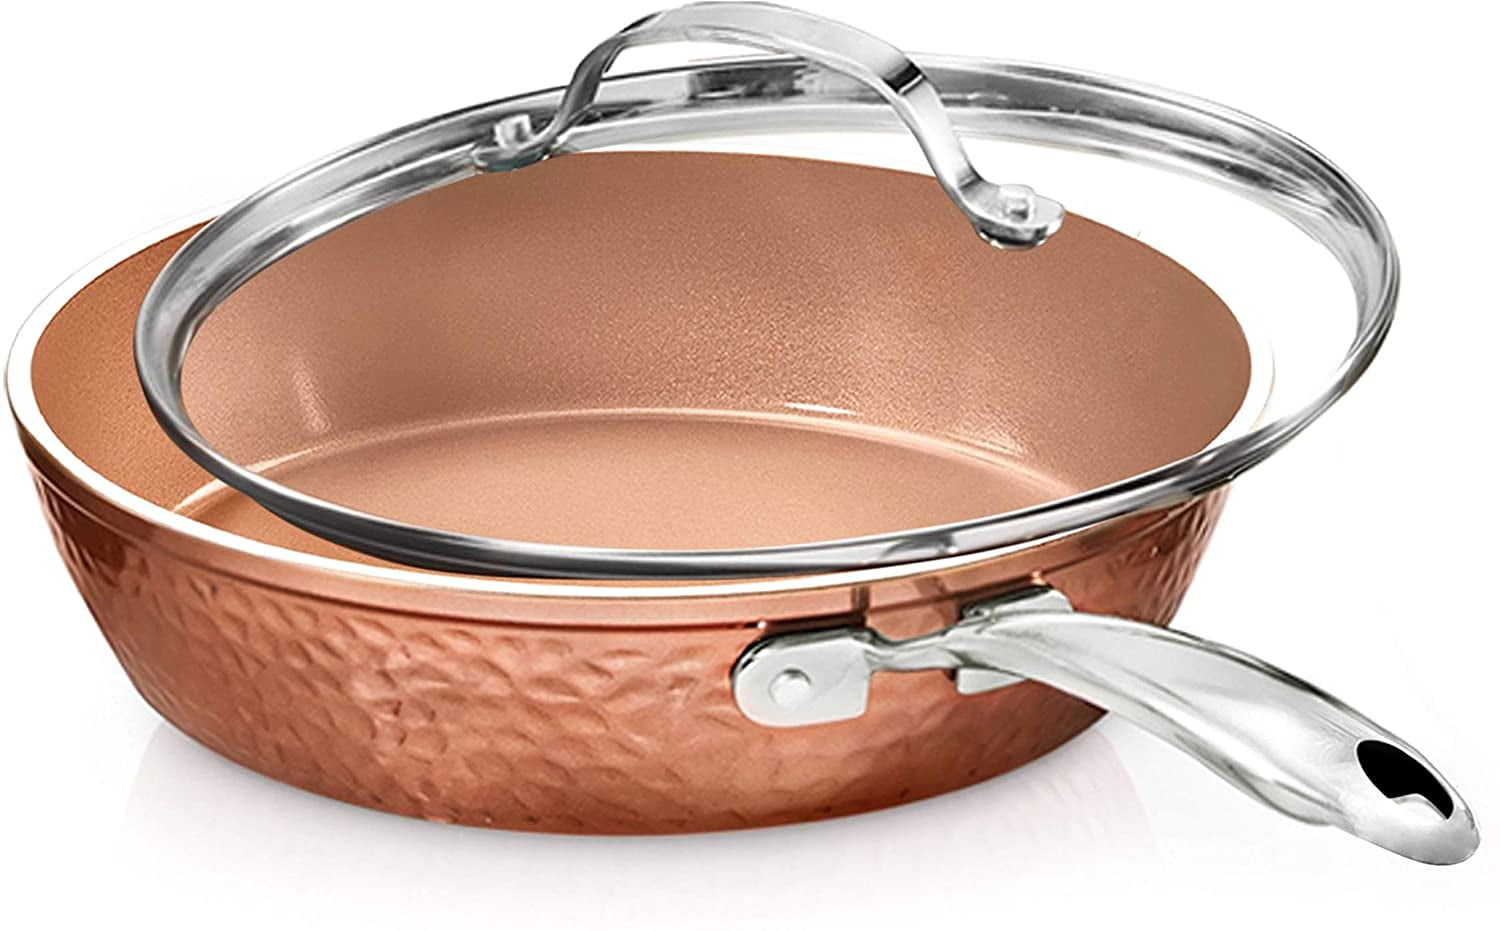 Gotham Steel 10 in. Hammered Copper Non Stick Frying Pan Set with Lid